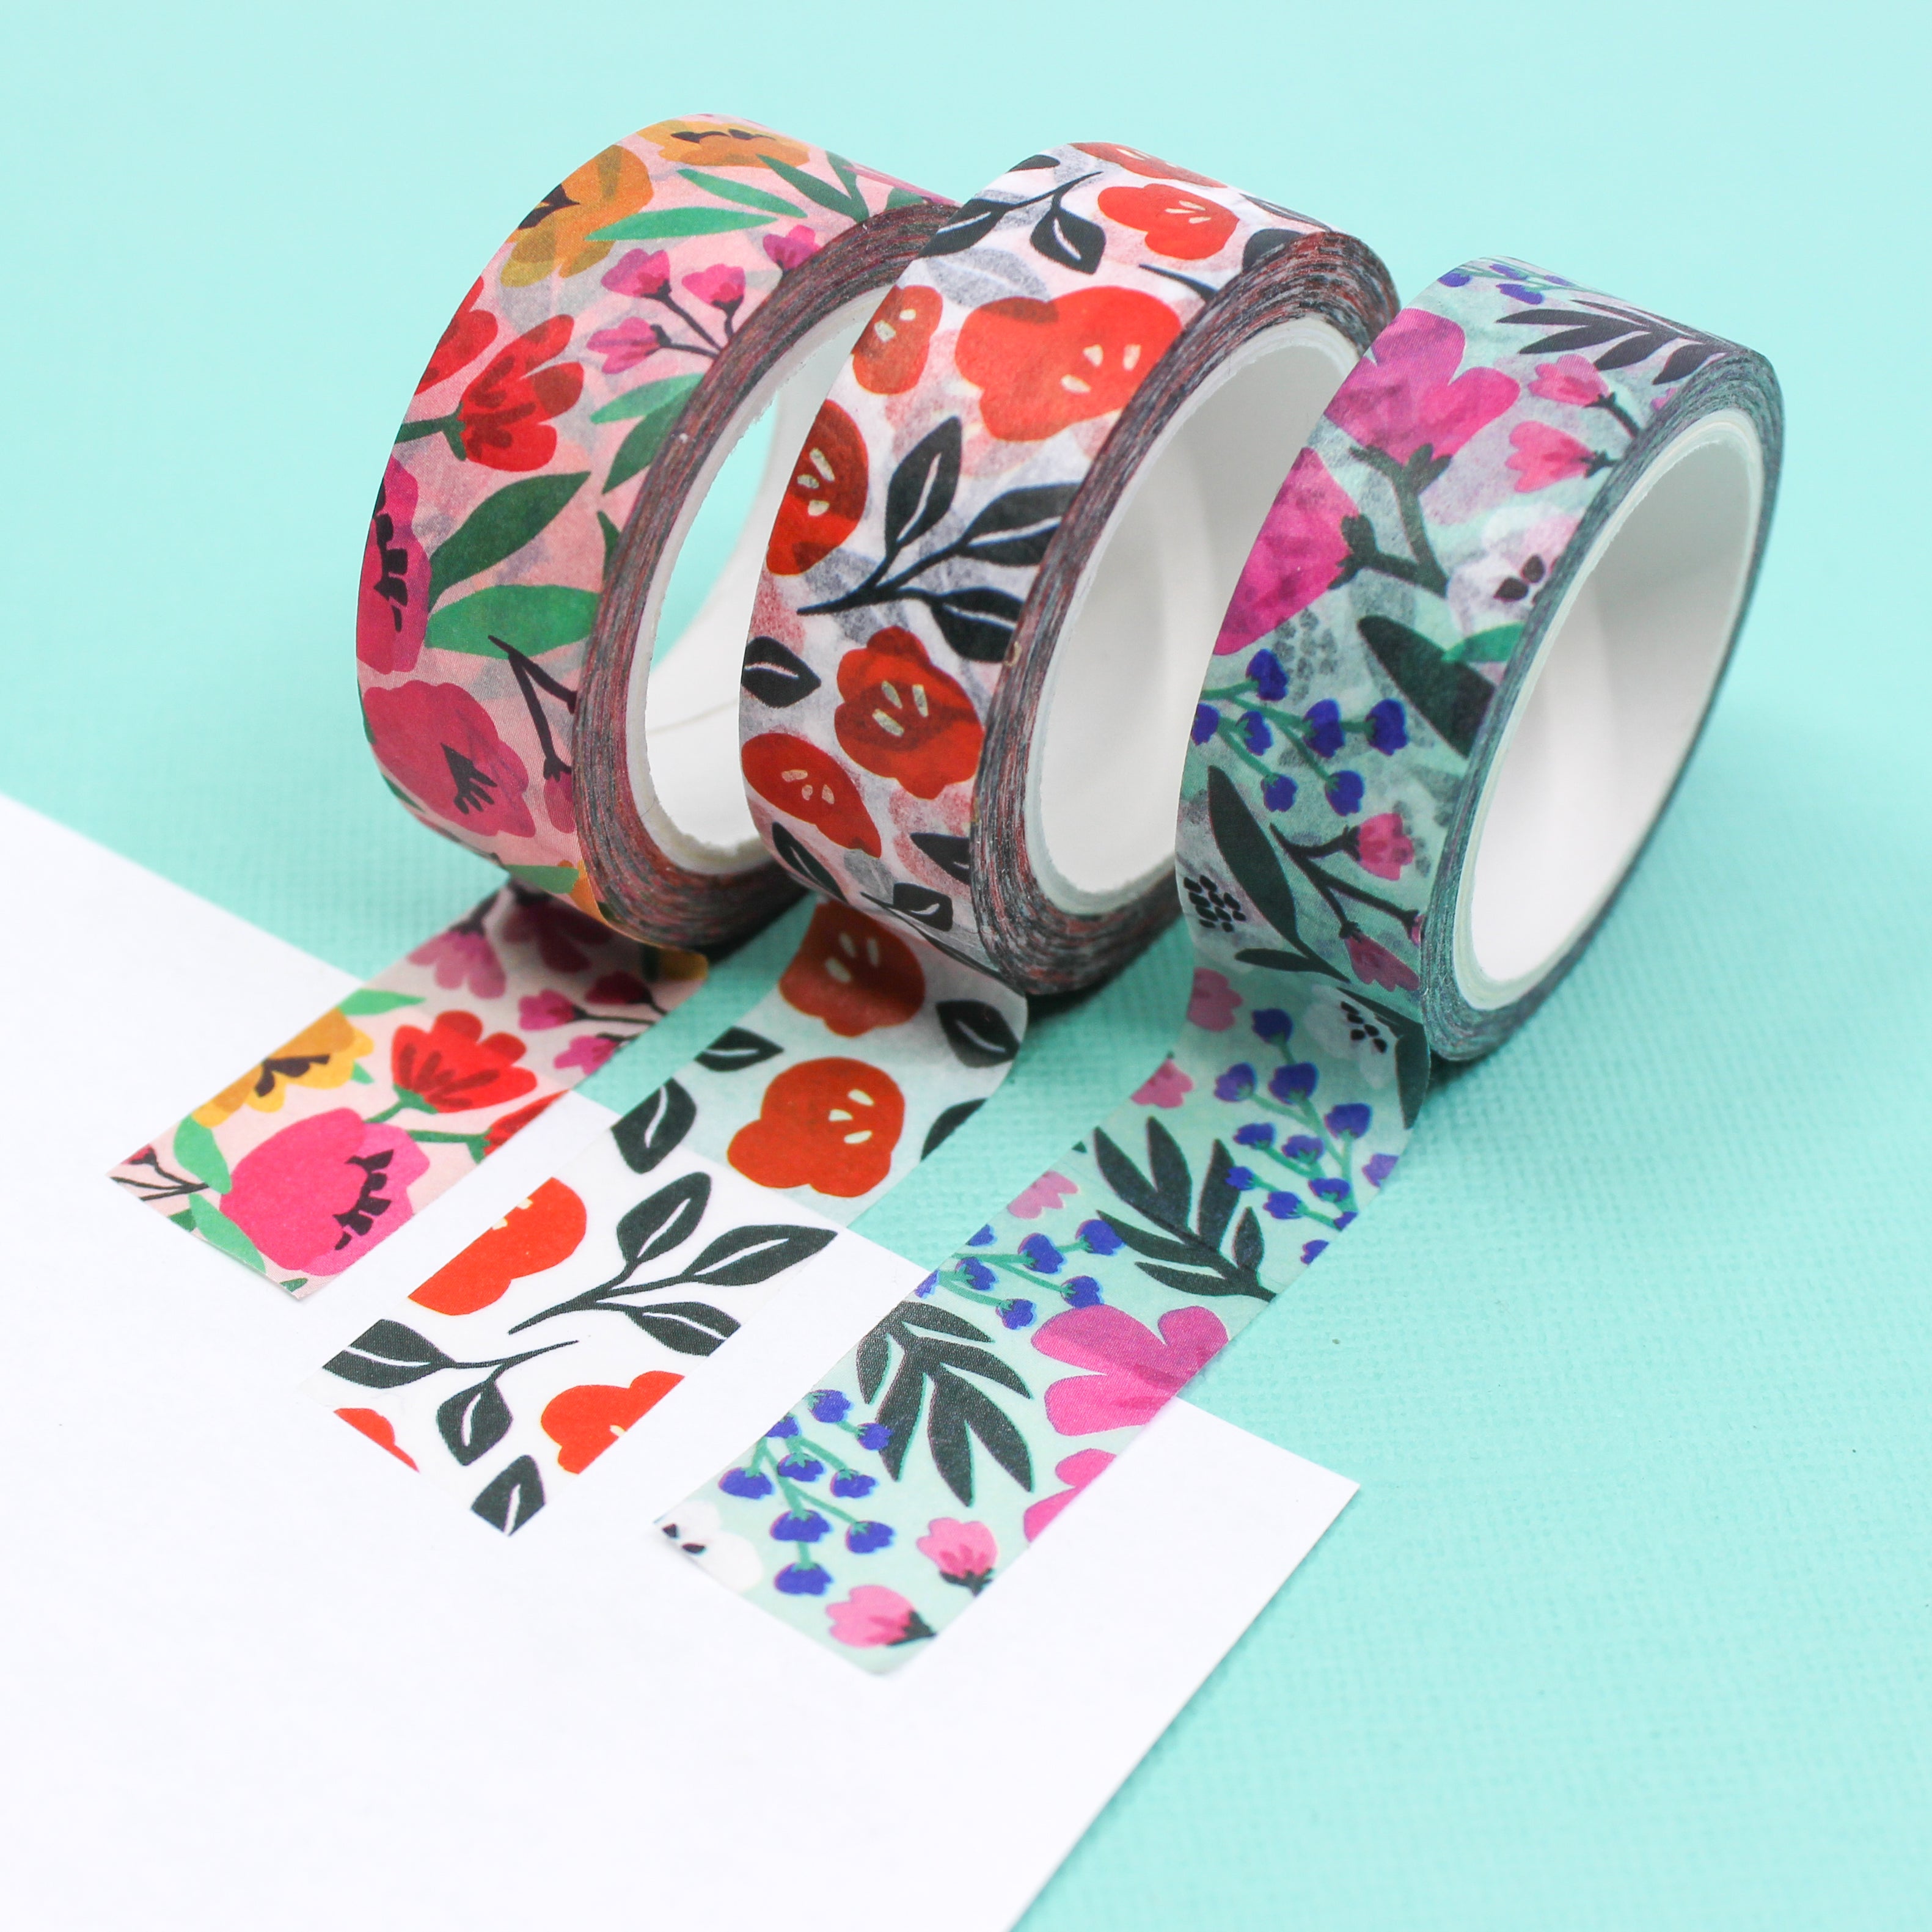 Cute Washi Tape Washi Tape Journaling Tape Gift Ideas Gifts for Her Cute  Gifts Decorative Tape Pretty Tape Cute Tape 